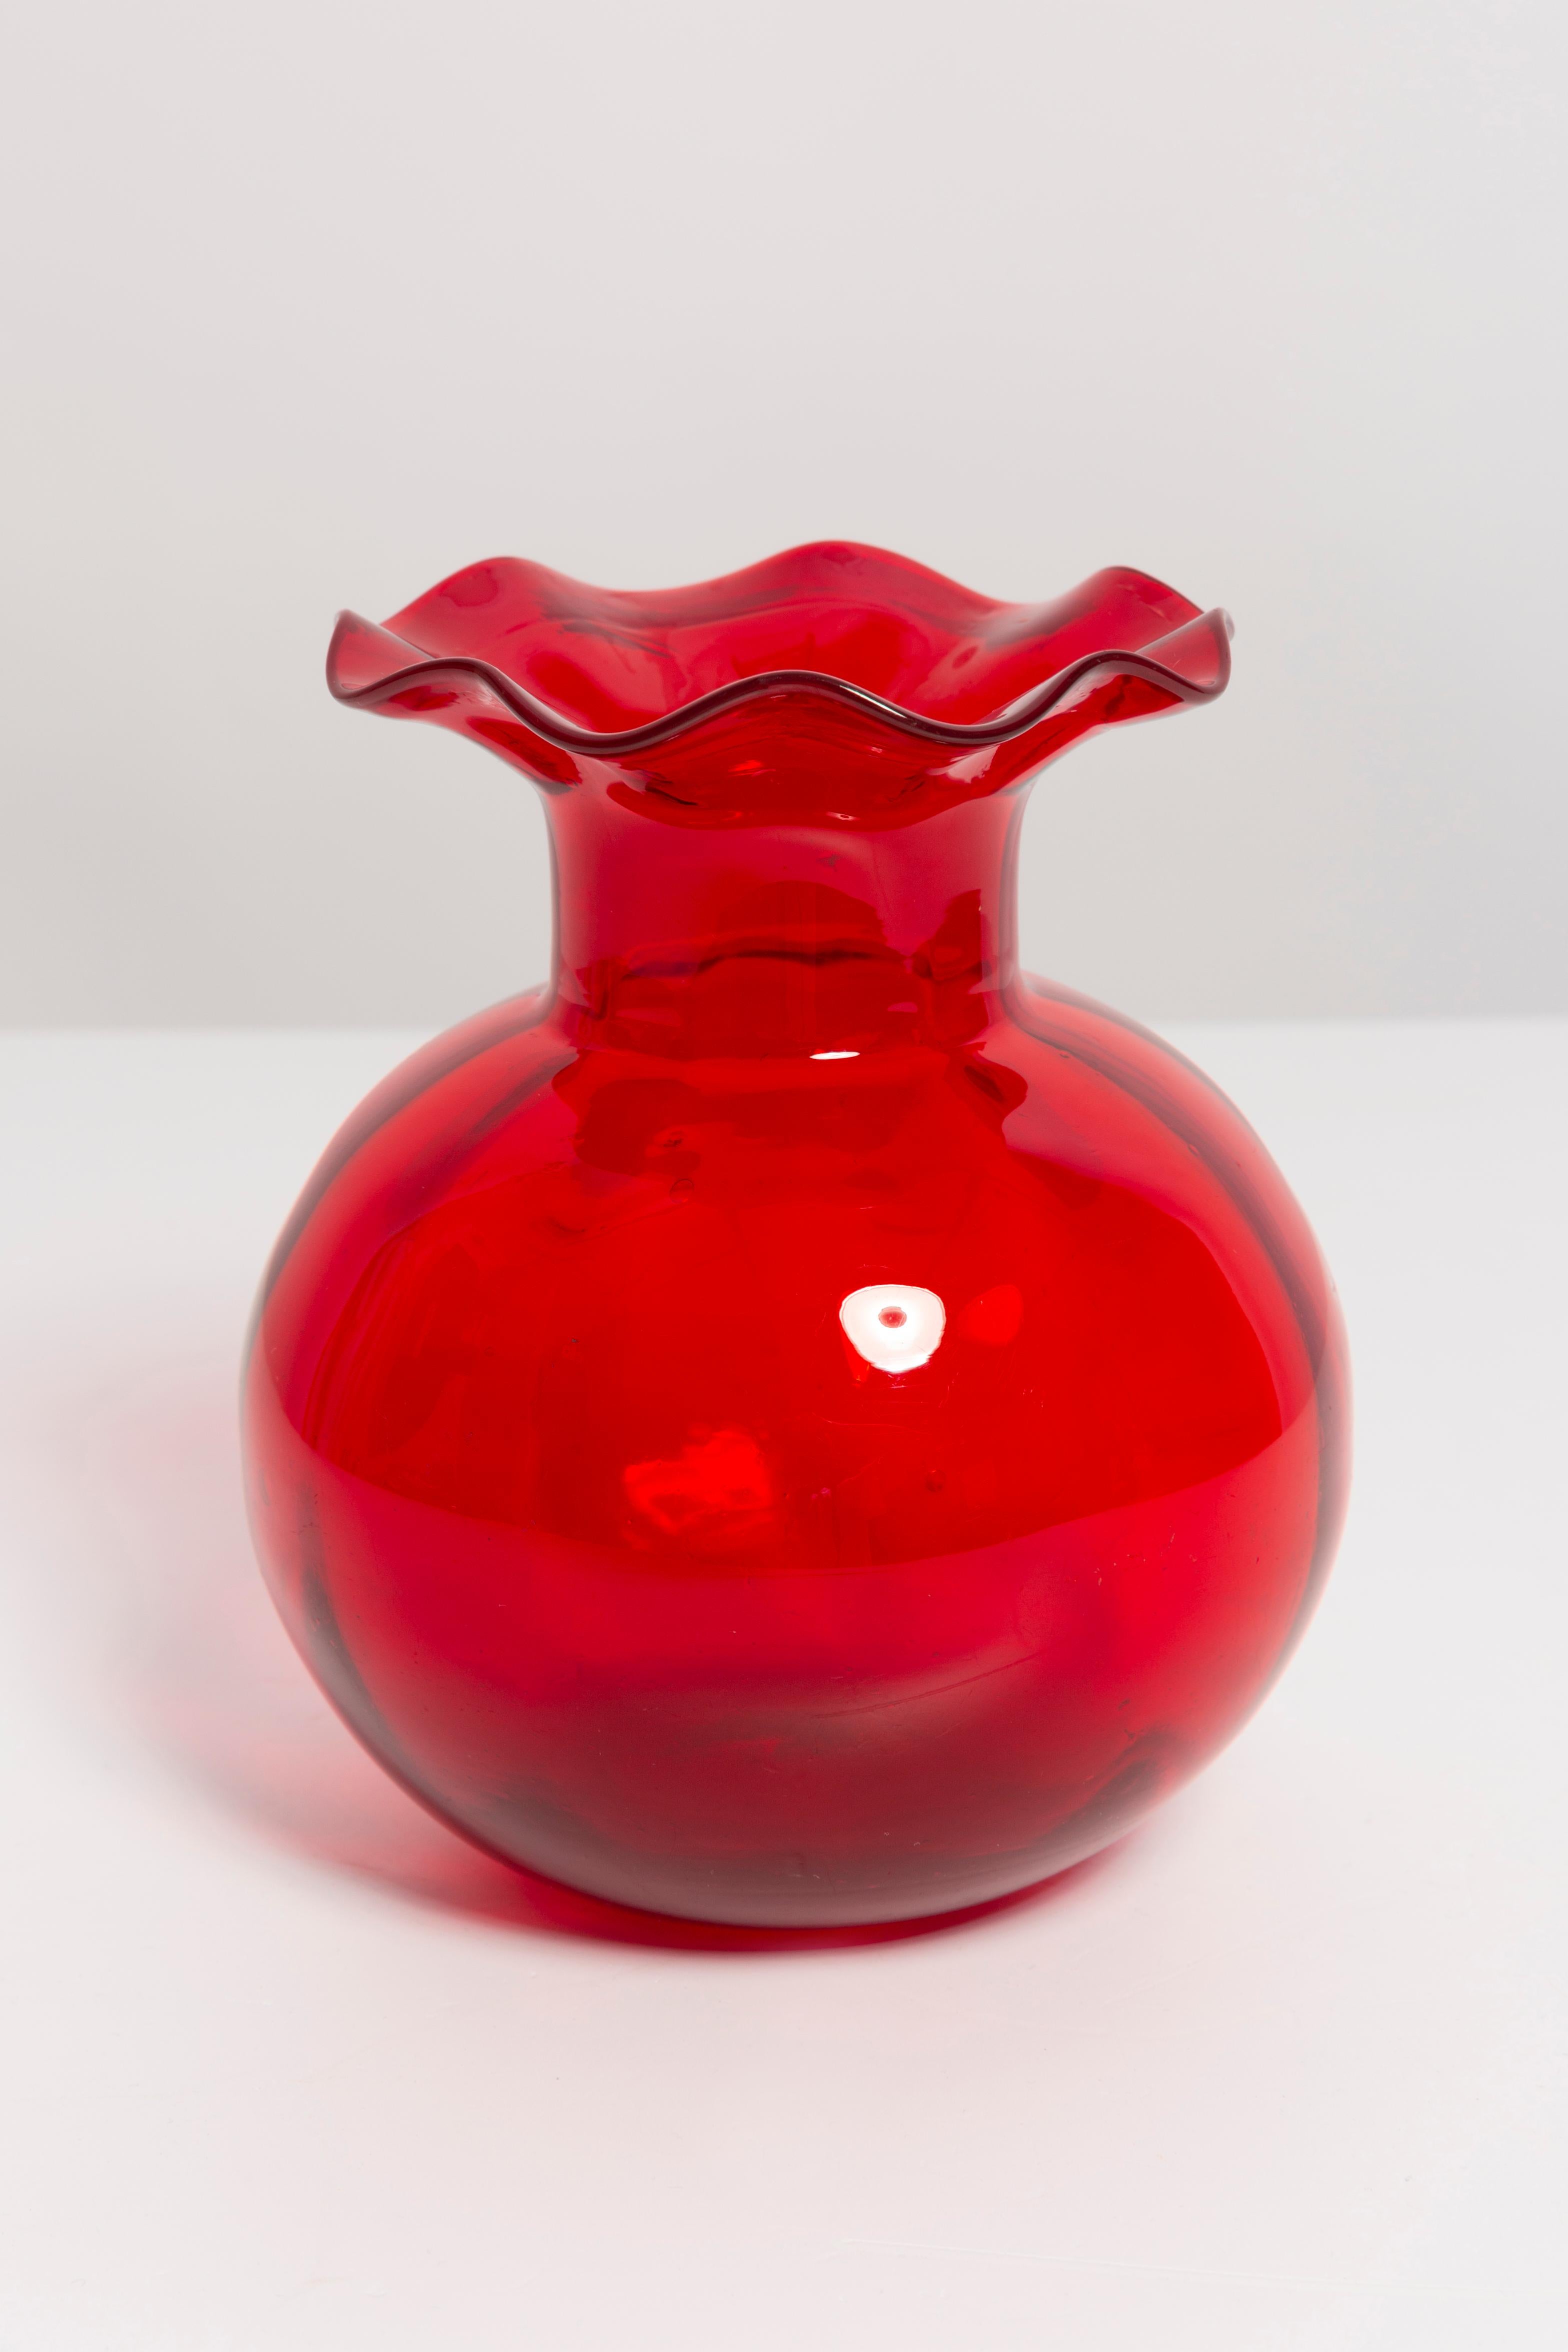 Red vase in amazing shape. Produced in 1960s in Poland.
Glass in perfect condition. The vase looks like it has just been taken out of the box.

No jags, defects etc. The outer relief surface, the inner smooth. Thick glass vase, massive.

 Only